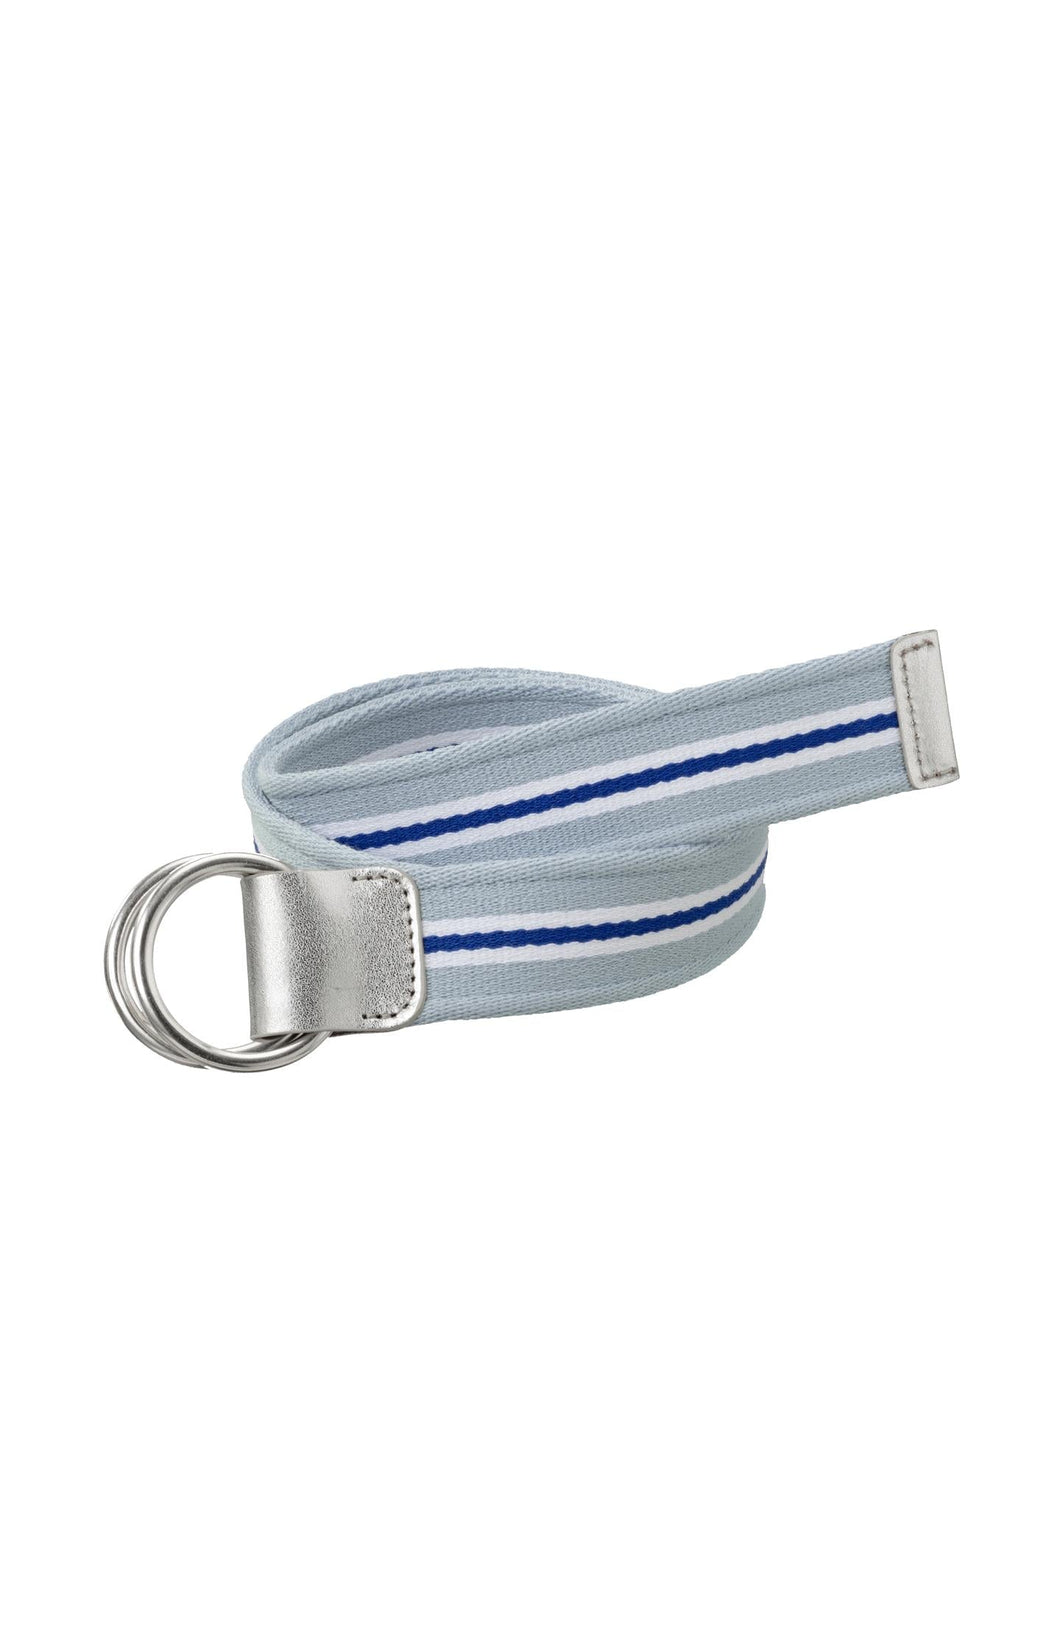 D-ring belt with stripes and silver details - Bright Cobalt Blue - Type: product